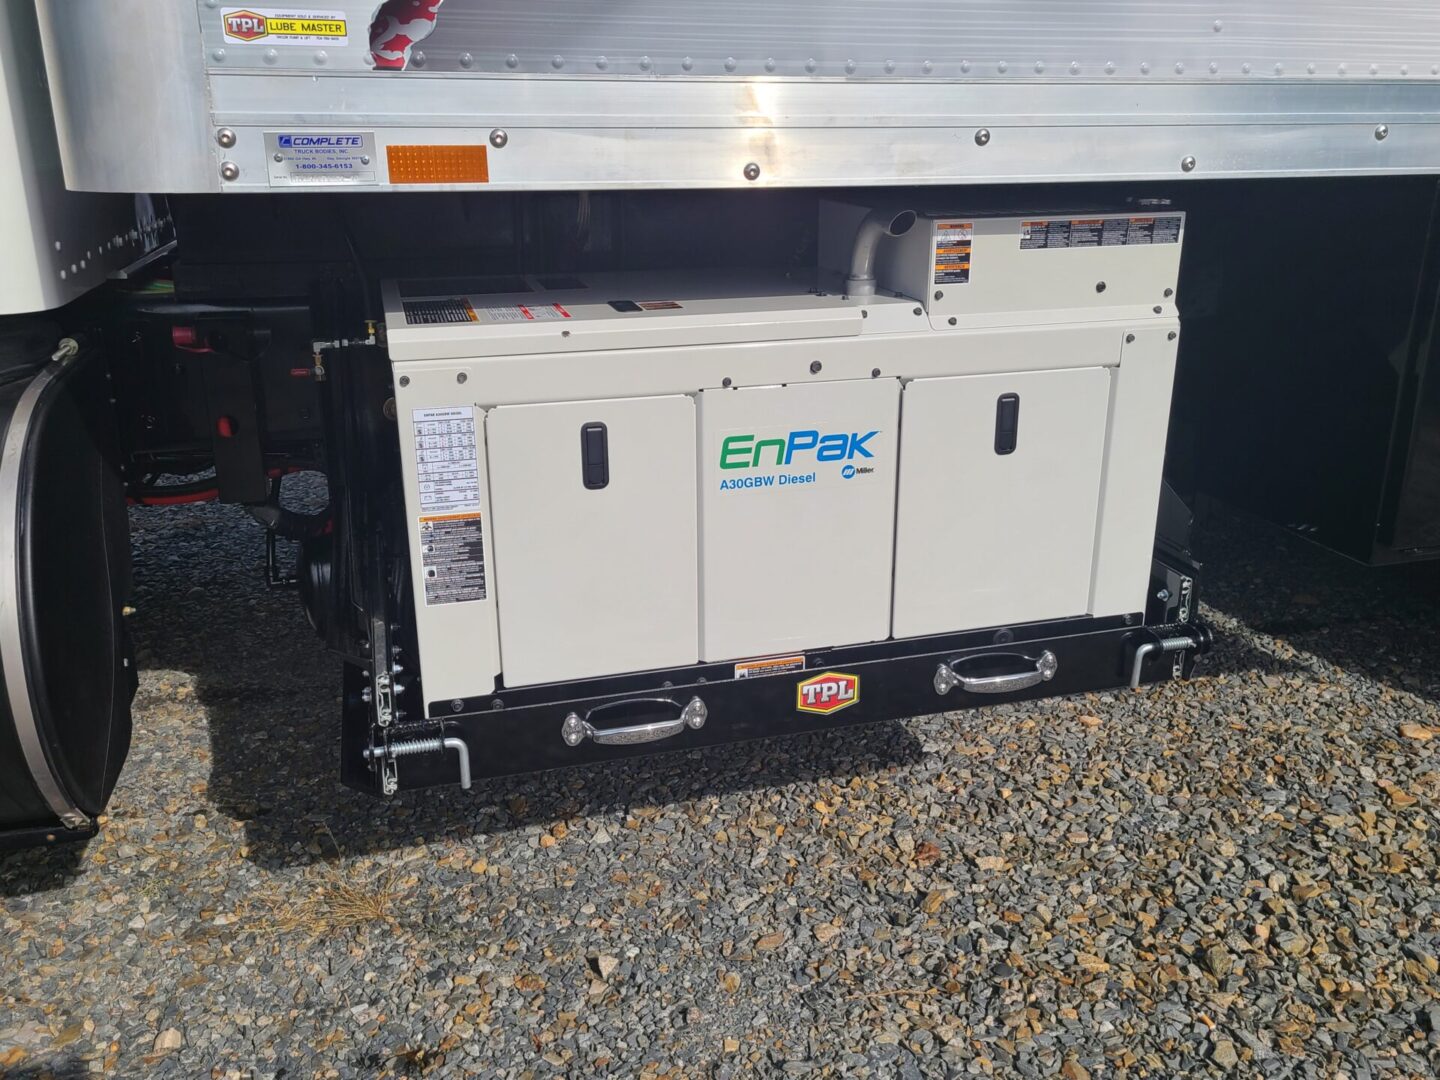 A large white truck with two generators on the side.